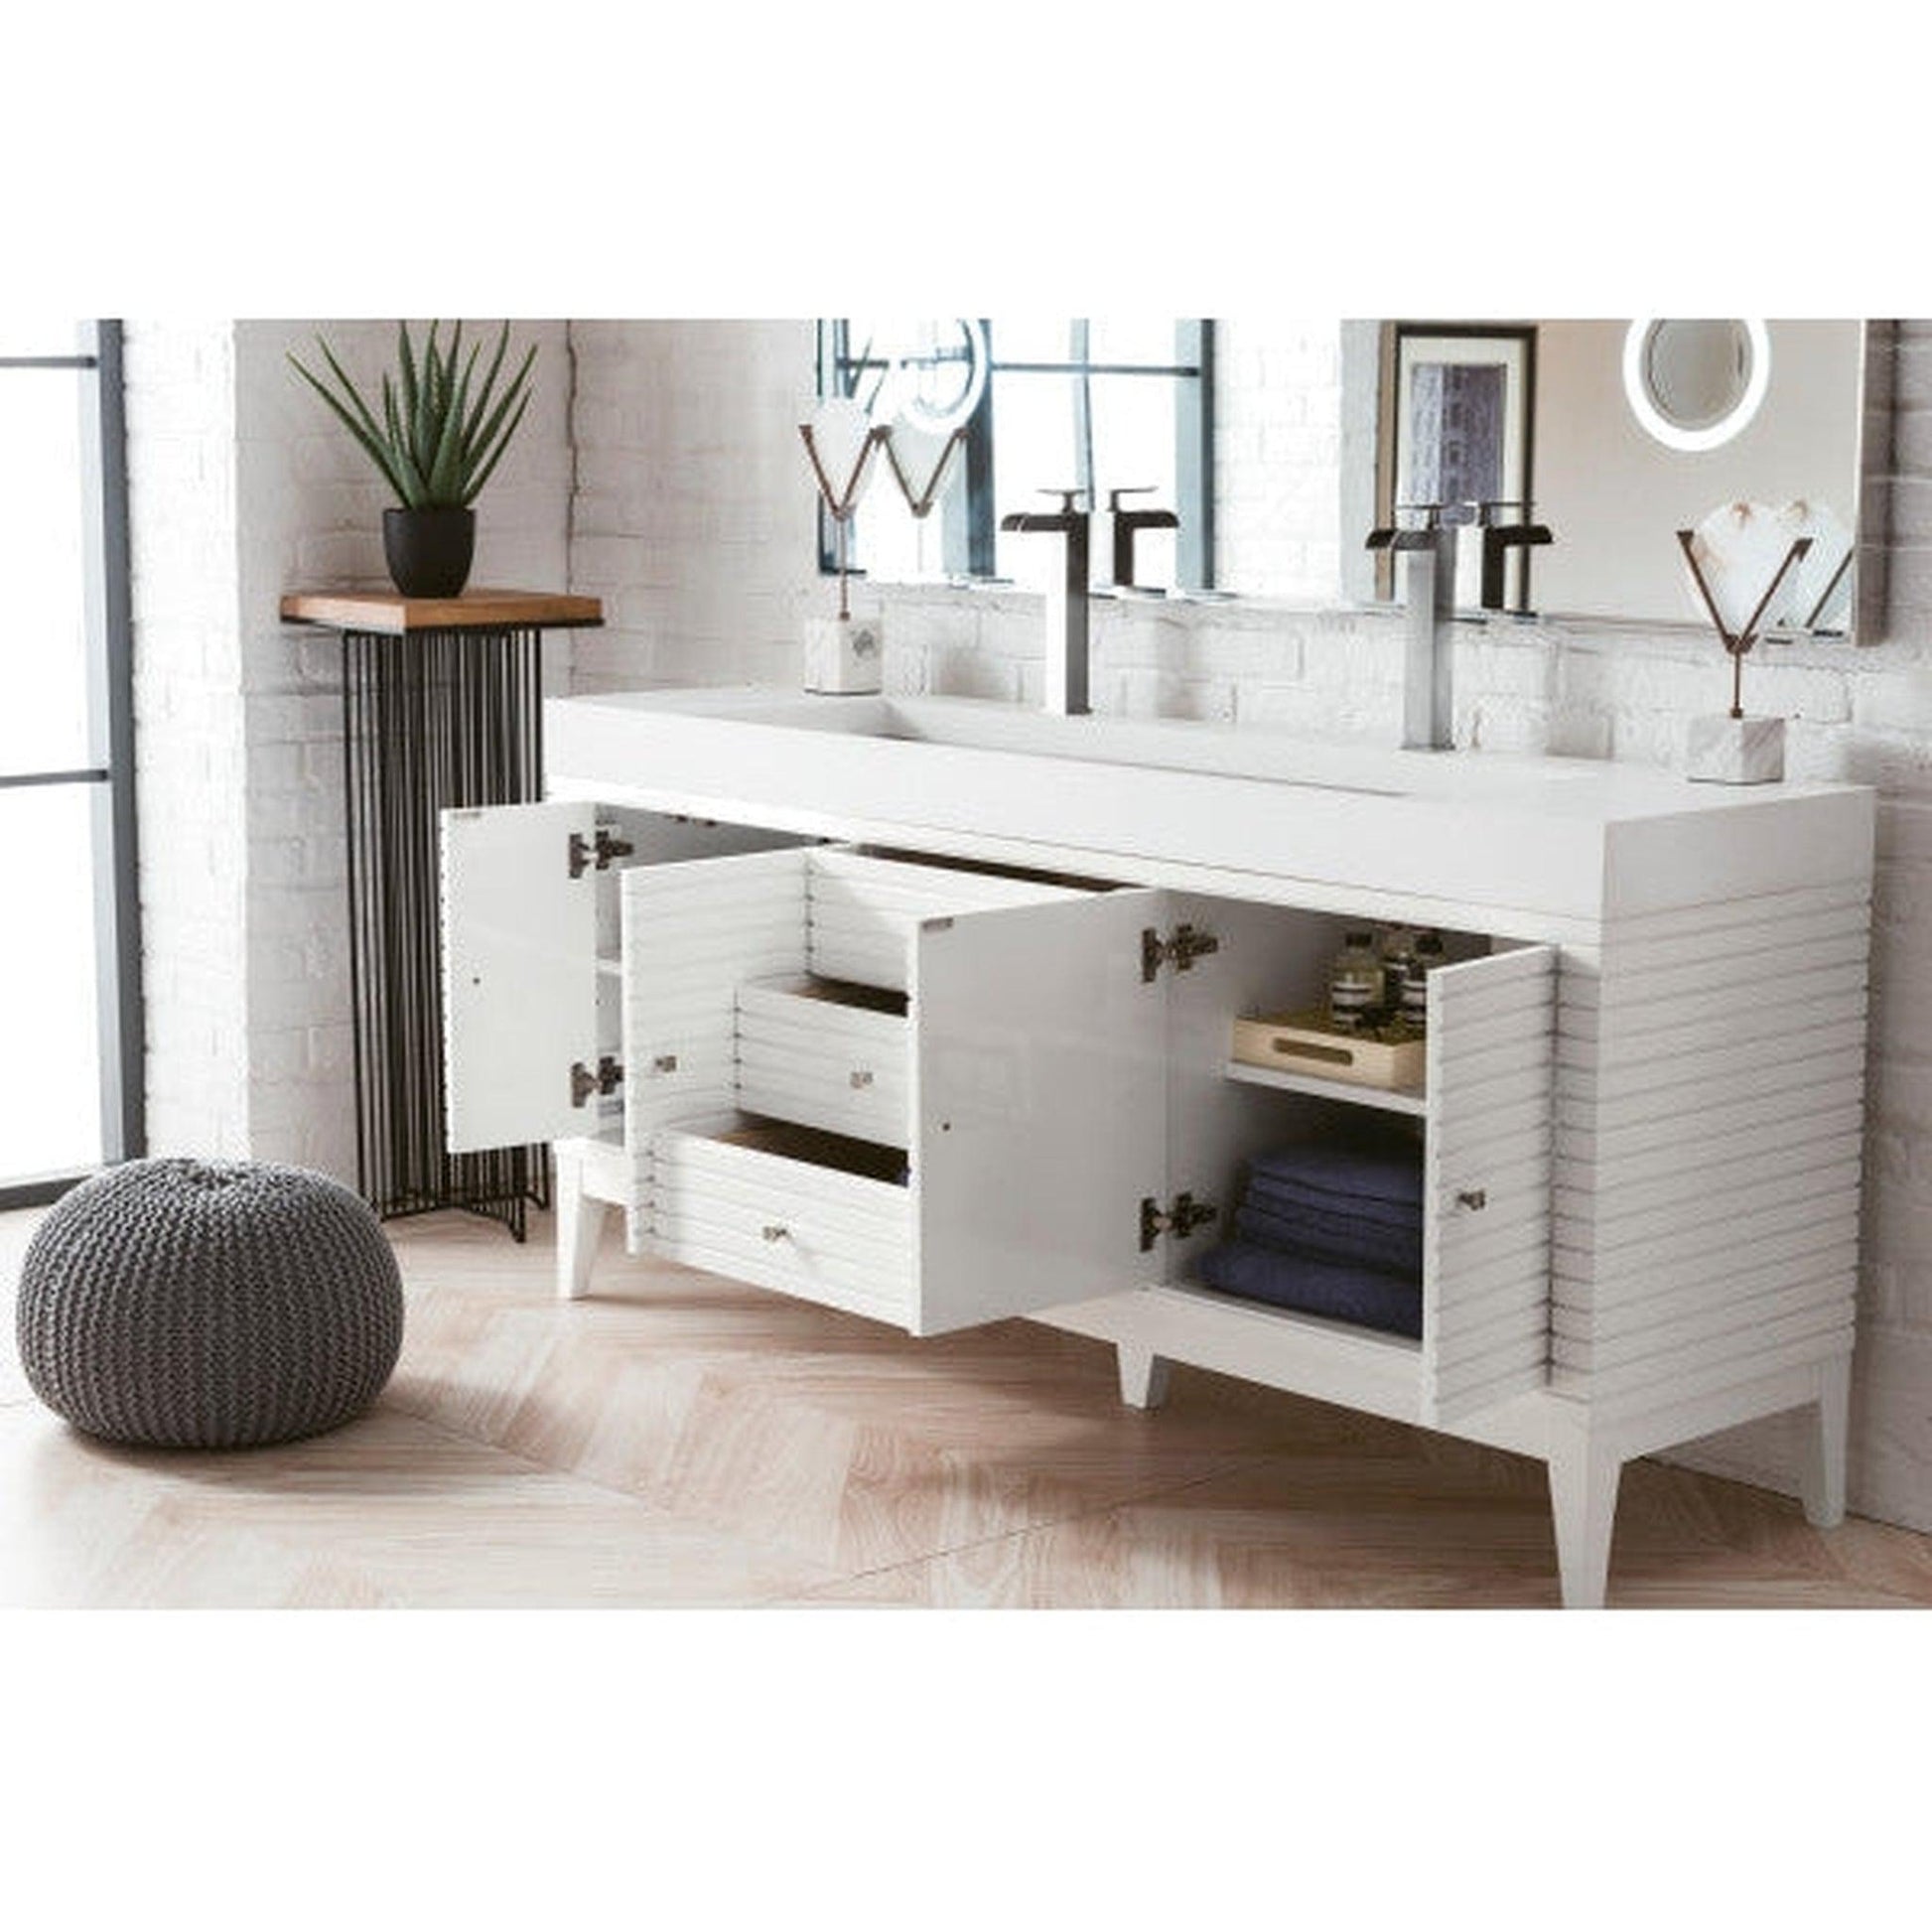 James Martin Linear 73" Double Glossy White Bathroom Vanity With 6" Glossy White Composite Countertop